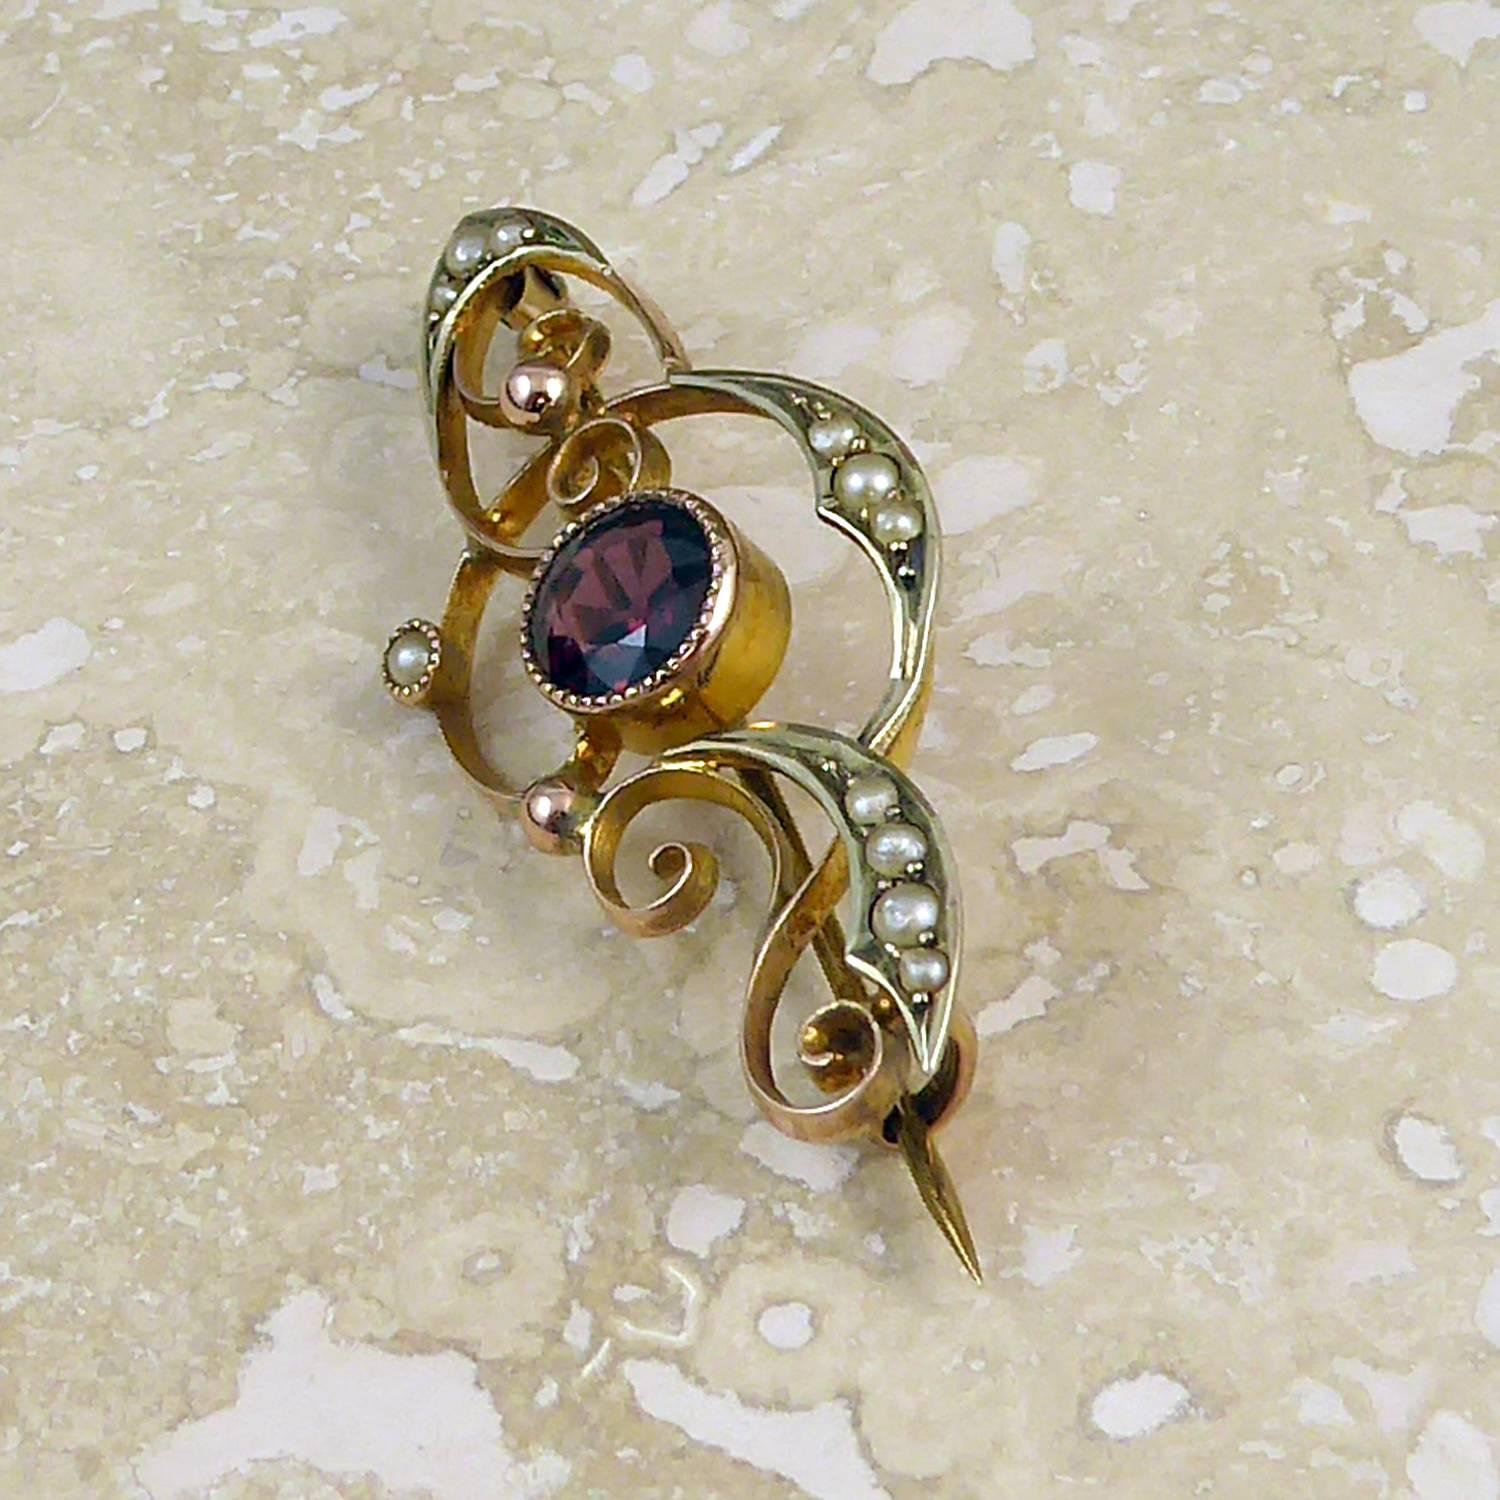 Antique Art Nouveau Gold Pin, Garnet and Seed Pearls, Rose and Yellow Gold 3